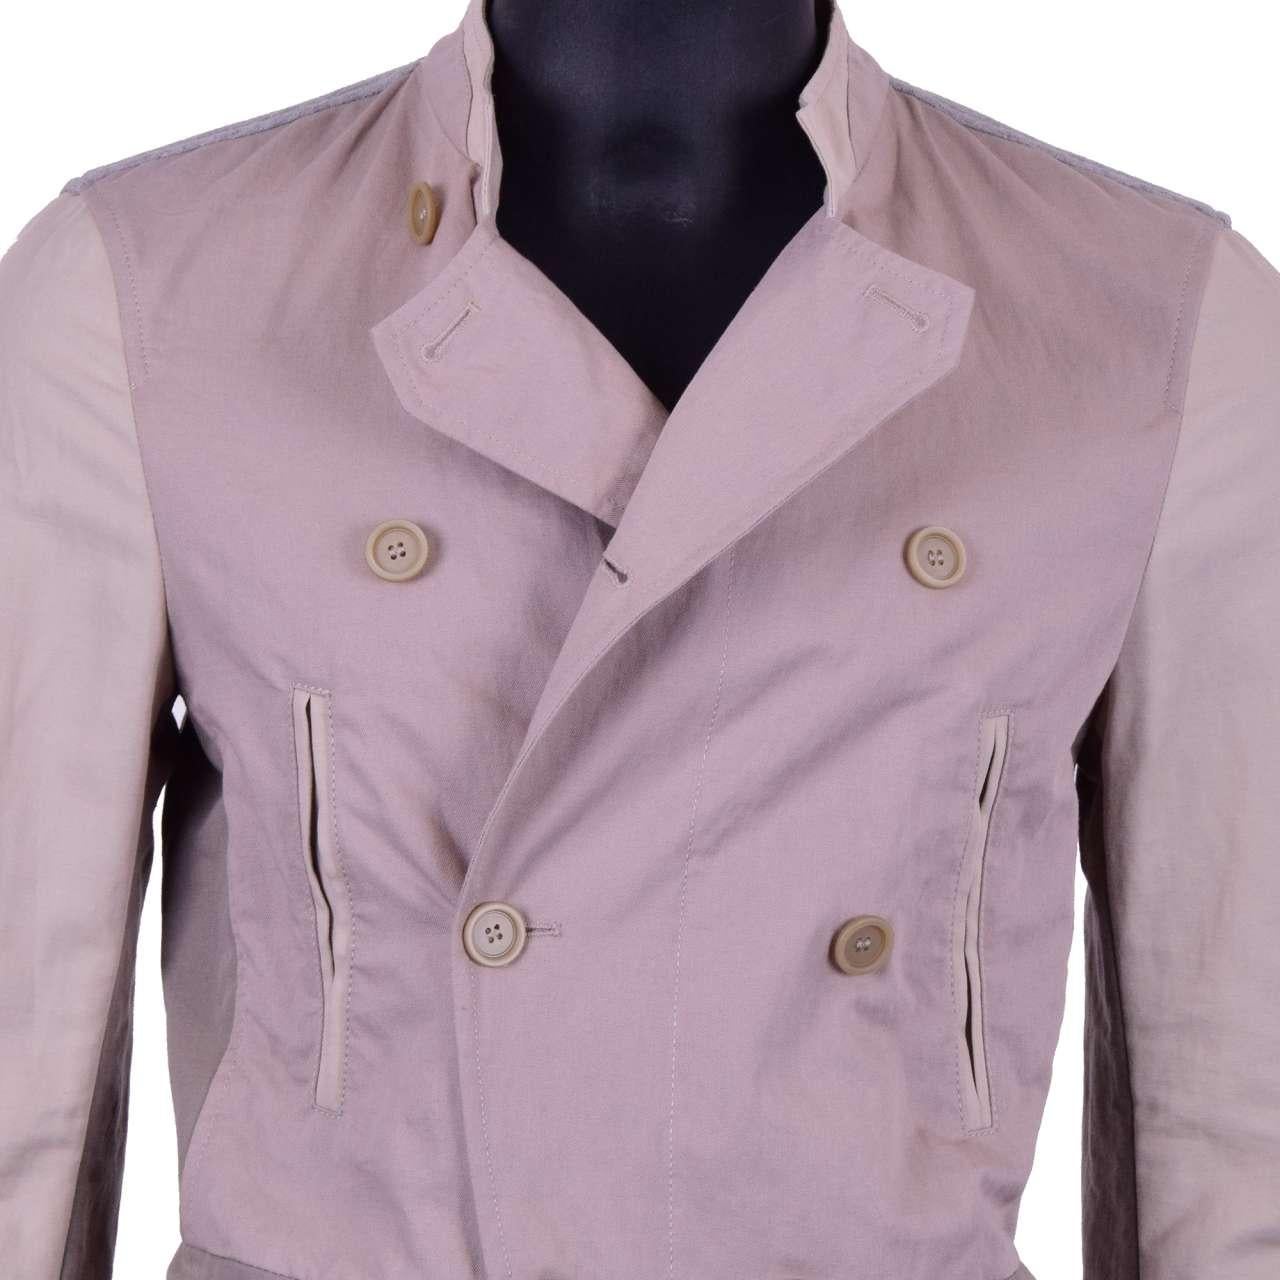 - Light Military Style Double-Breasted Jacket with Pockets by DOLCE & GABBANA - New with tag - MADE IN ITALY - Former RRP: EUR 950 - Model: G9O66T-G9N62-S9000 - Material: 90% Cotton, 10% Linen - Color: Beige / Gray - Double Breasted - Slim Fit - No